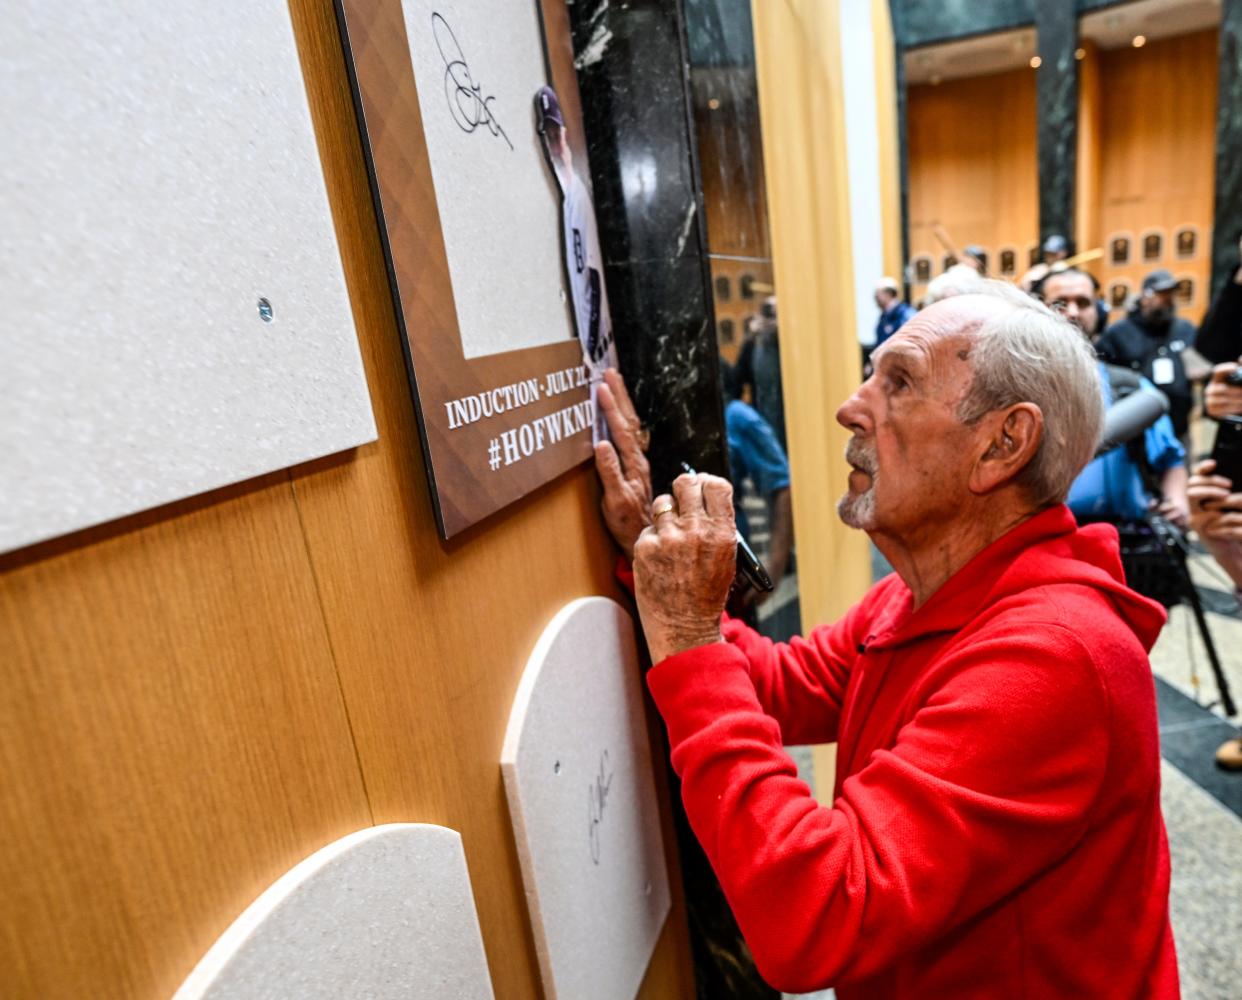 Newly elected Baseball Hall of Fame inductee Jim Leyland signs his name to the backer board of his plaque during a news conference Tuesday, Jan. 30, 2024, in Cooperstown, New York.